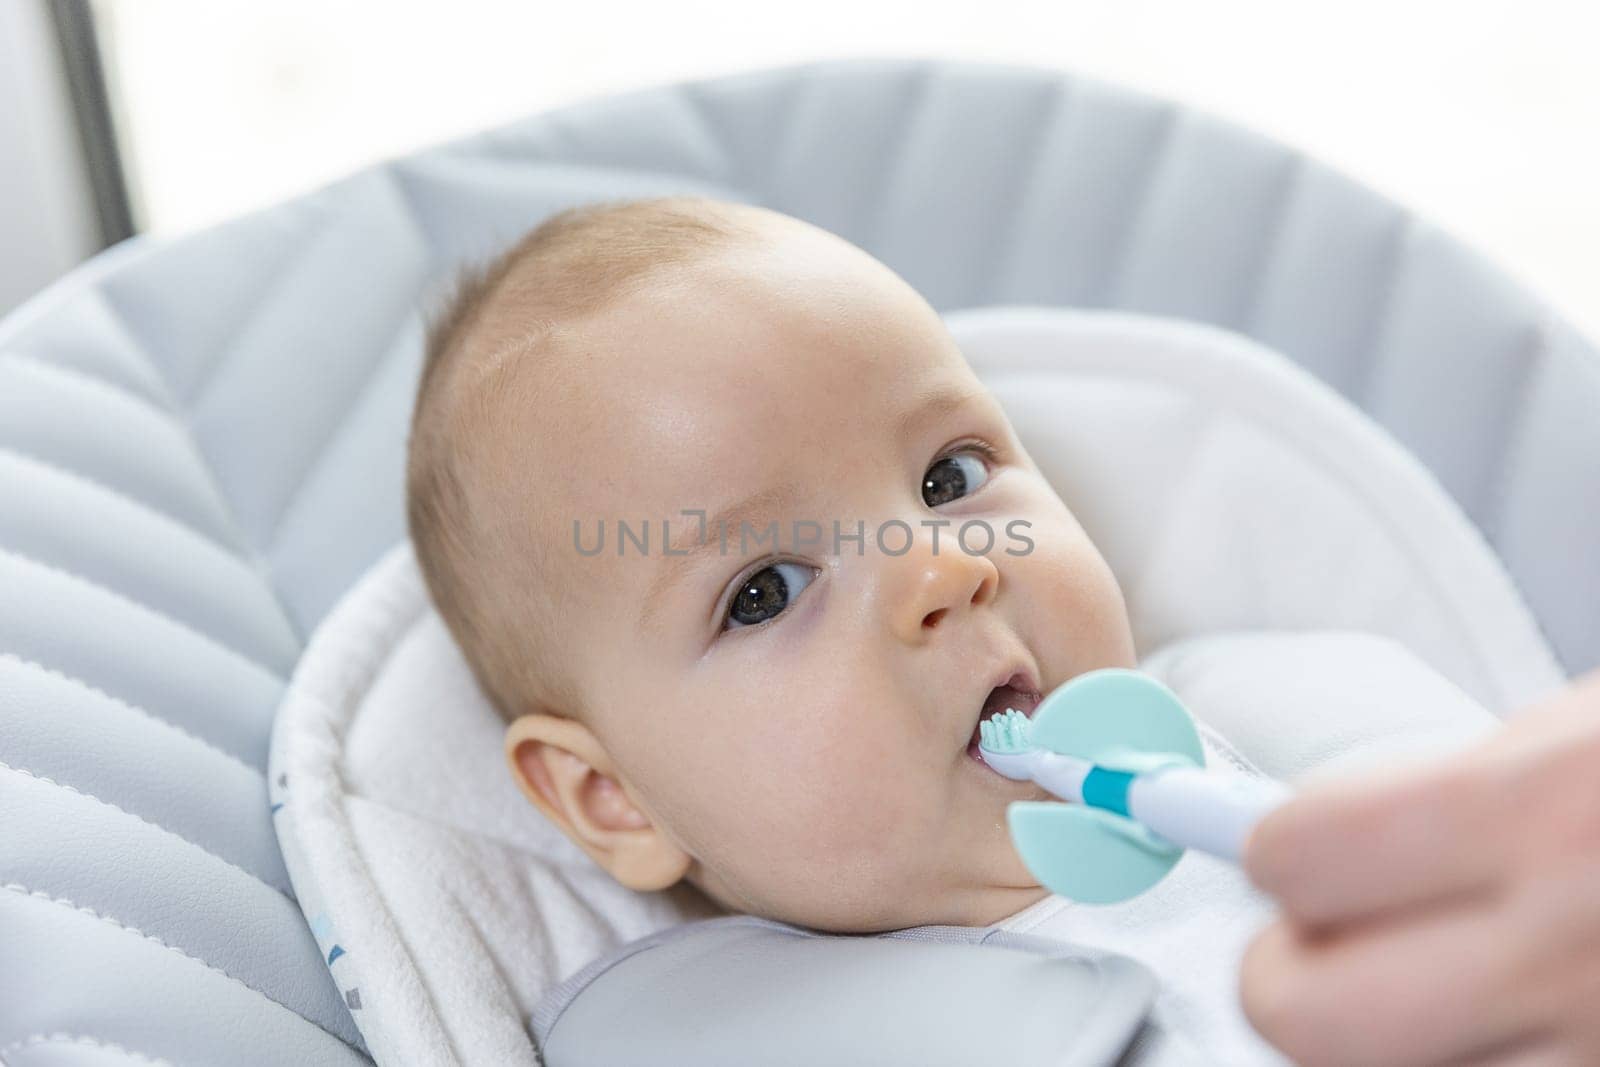 Newborn baby suffering of his tooth growth, mom using a teether to ease the pain, healthcare concept by Kadula